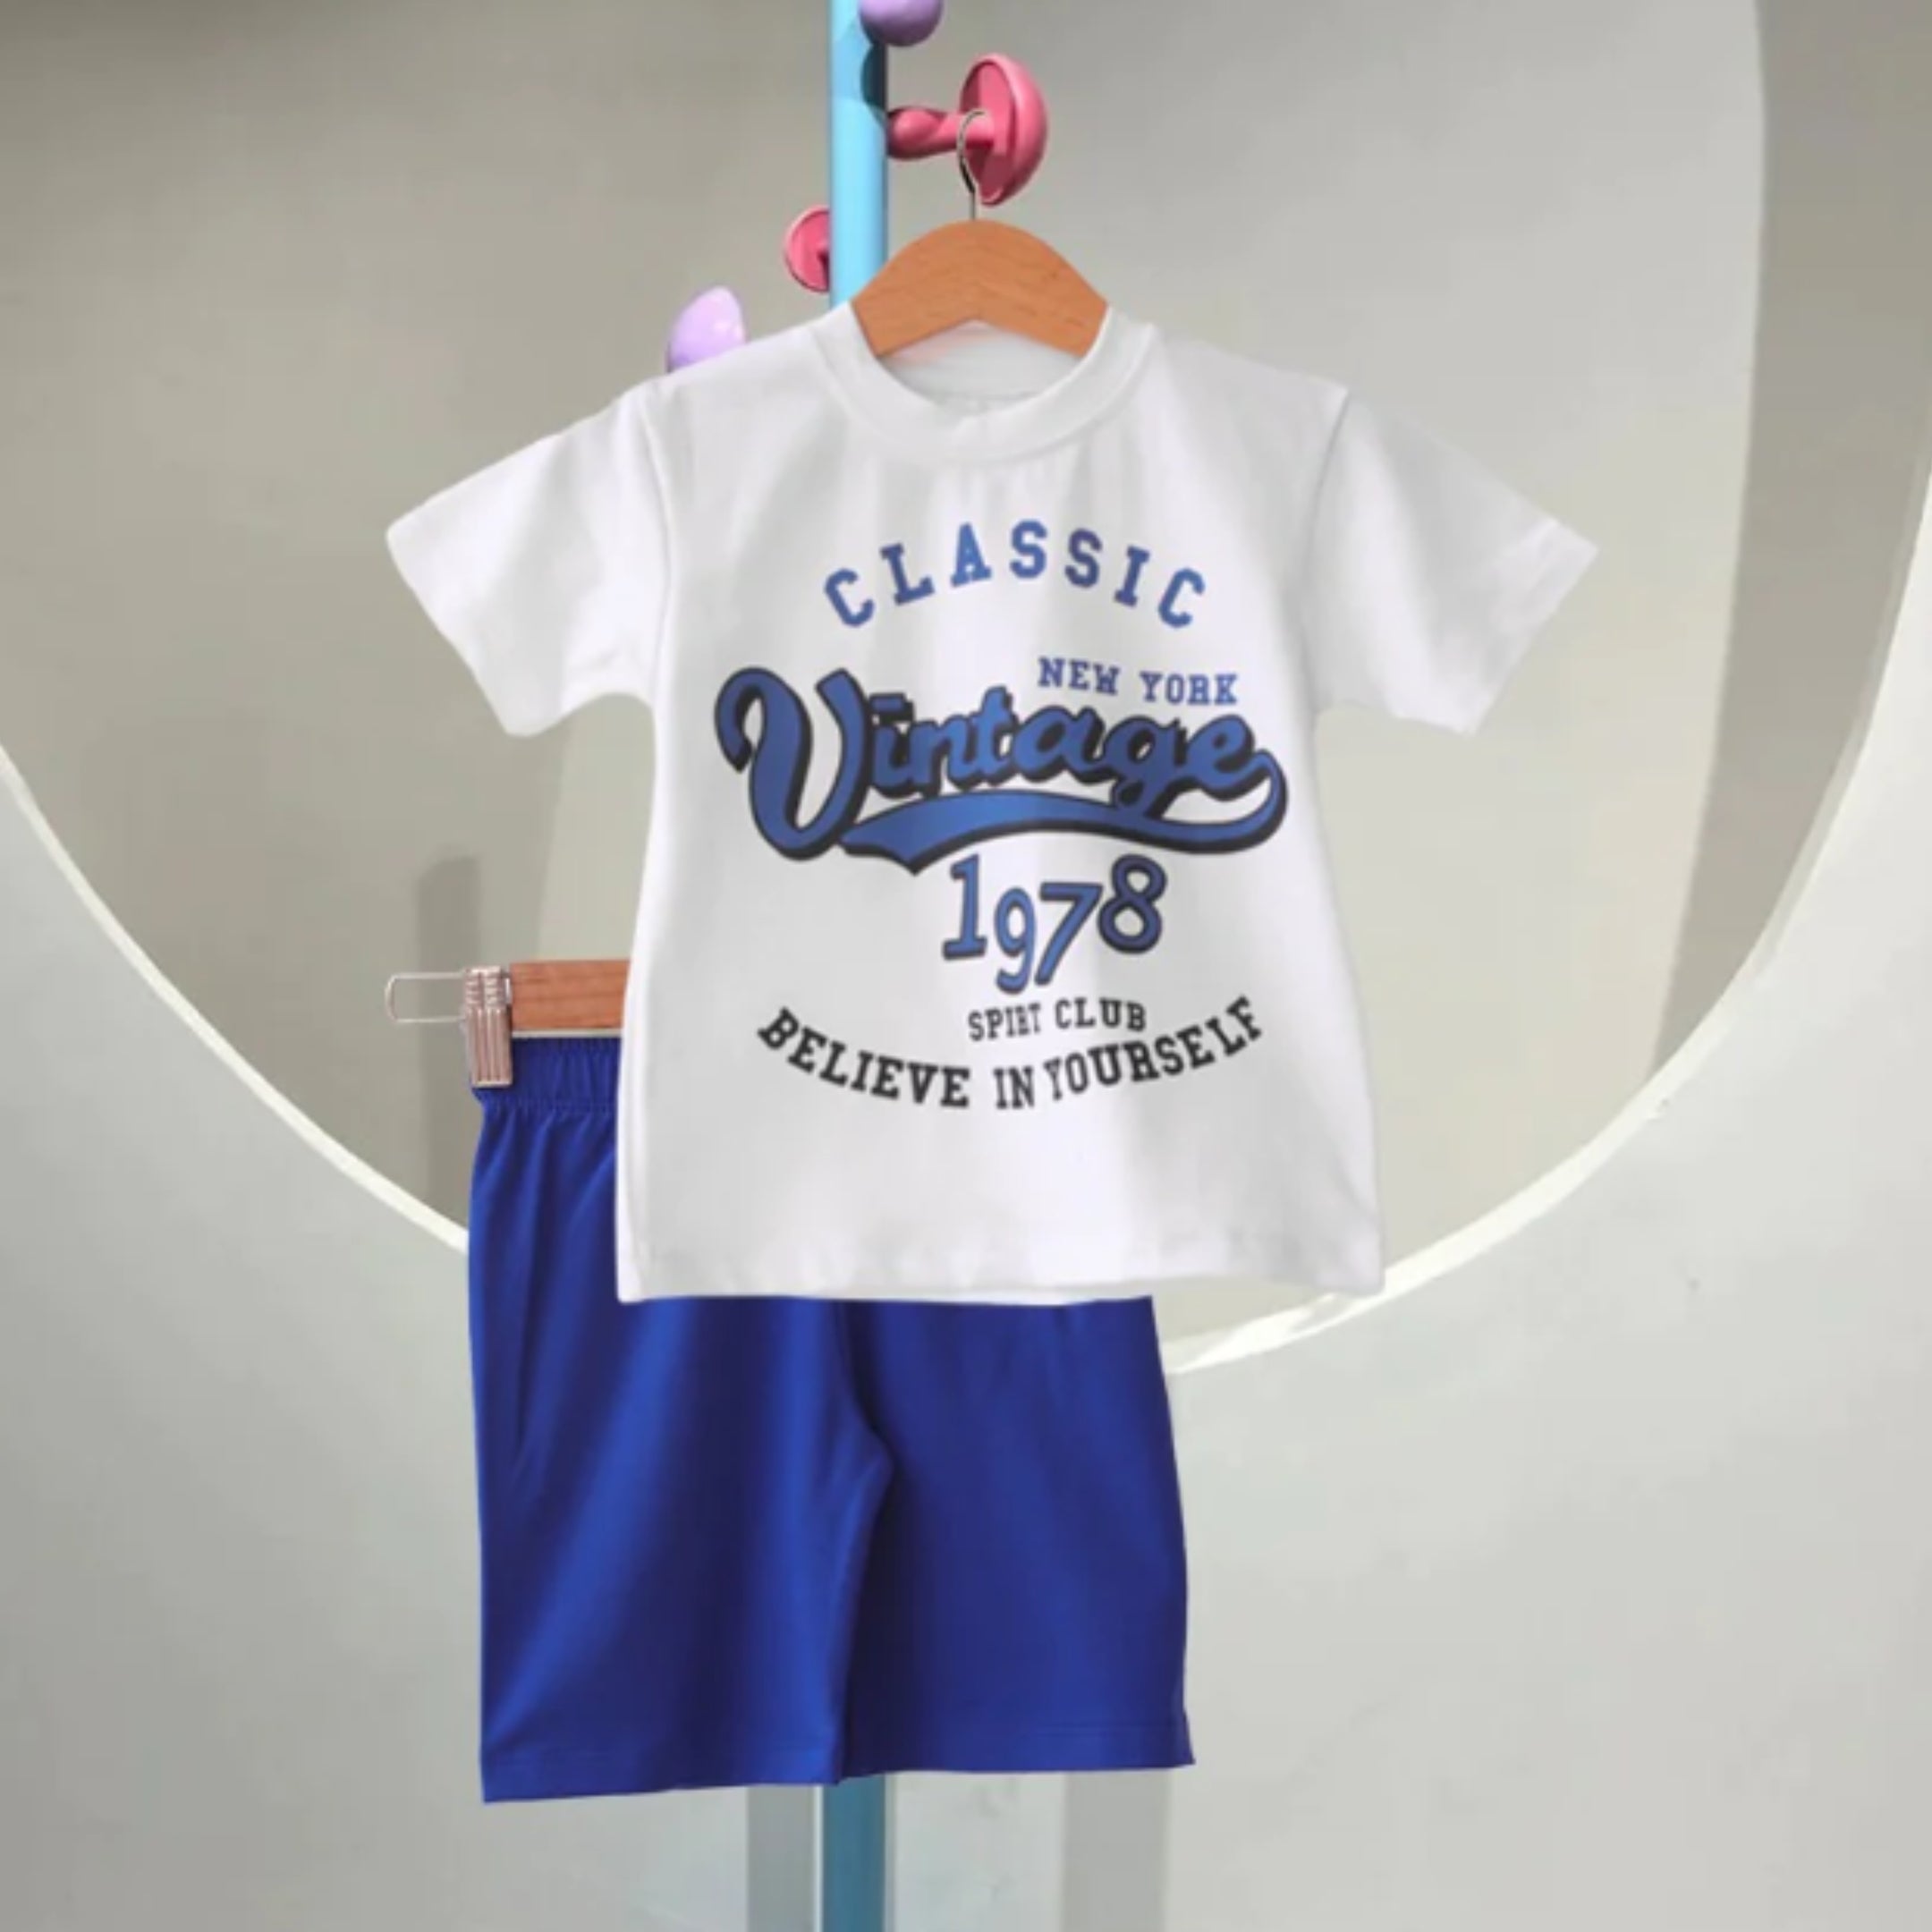 Vintage T-Shirt And Shorts For Kids